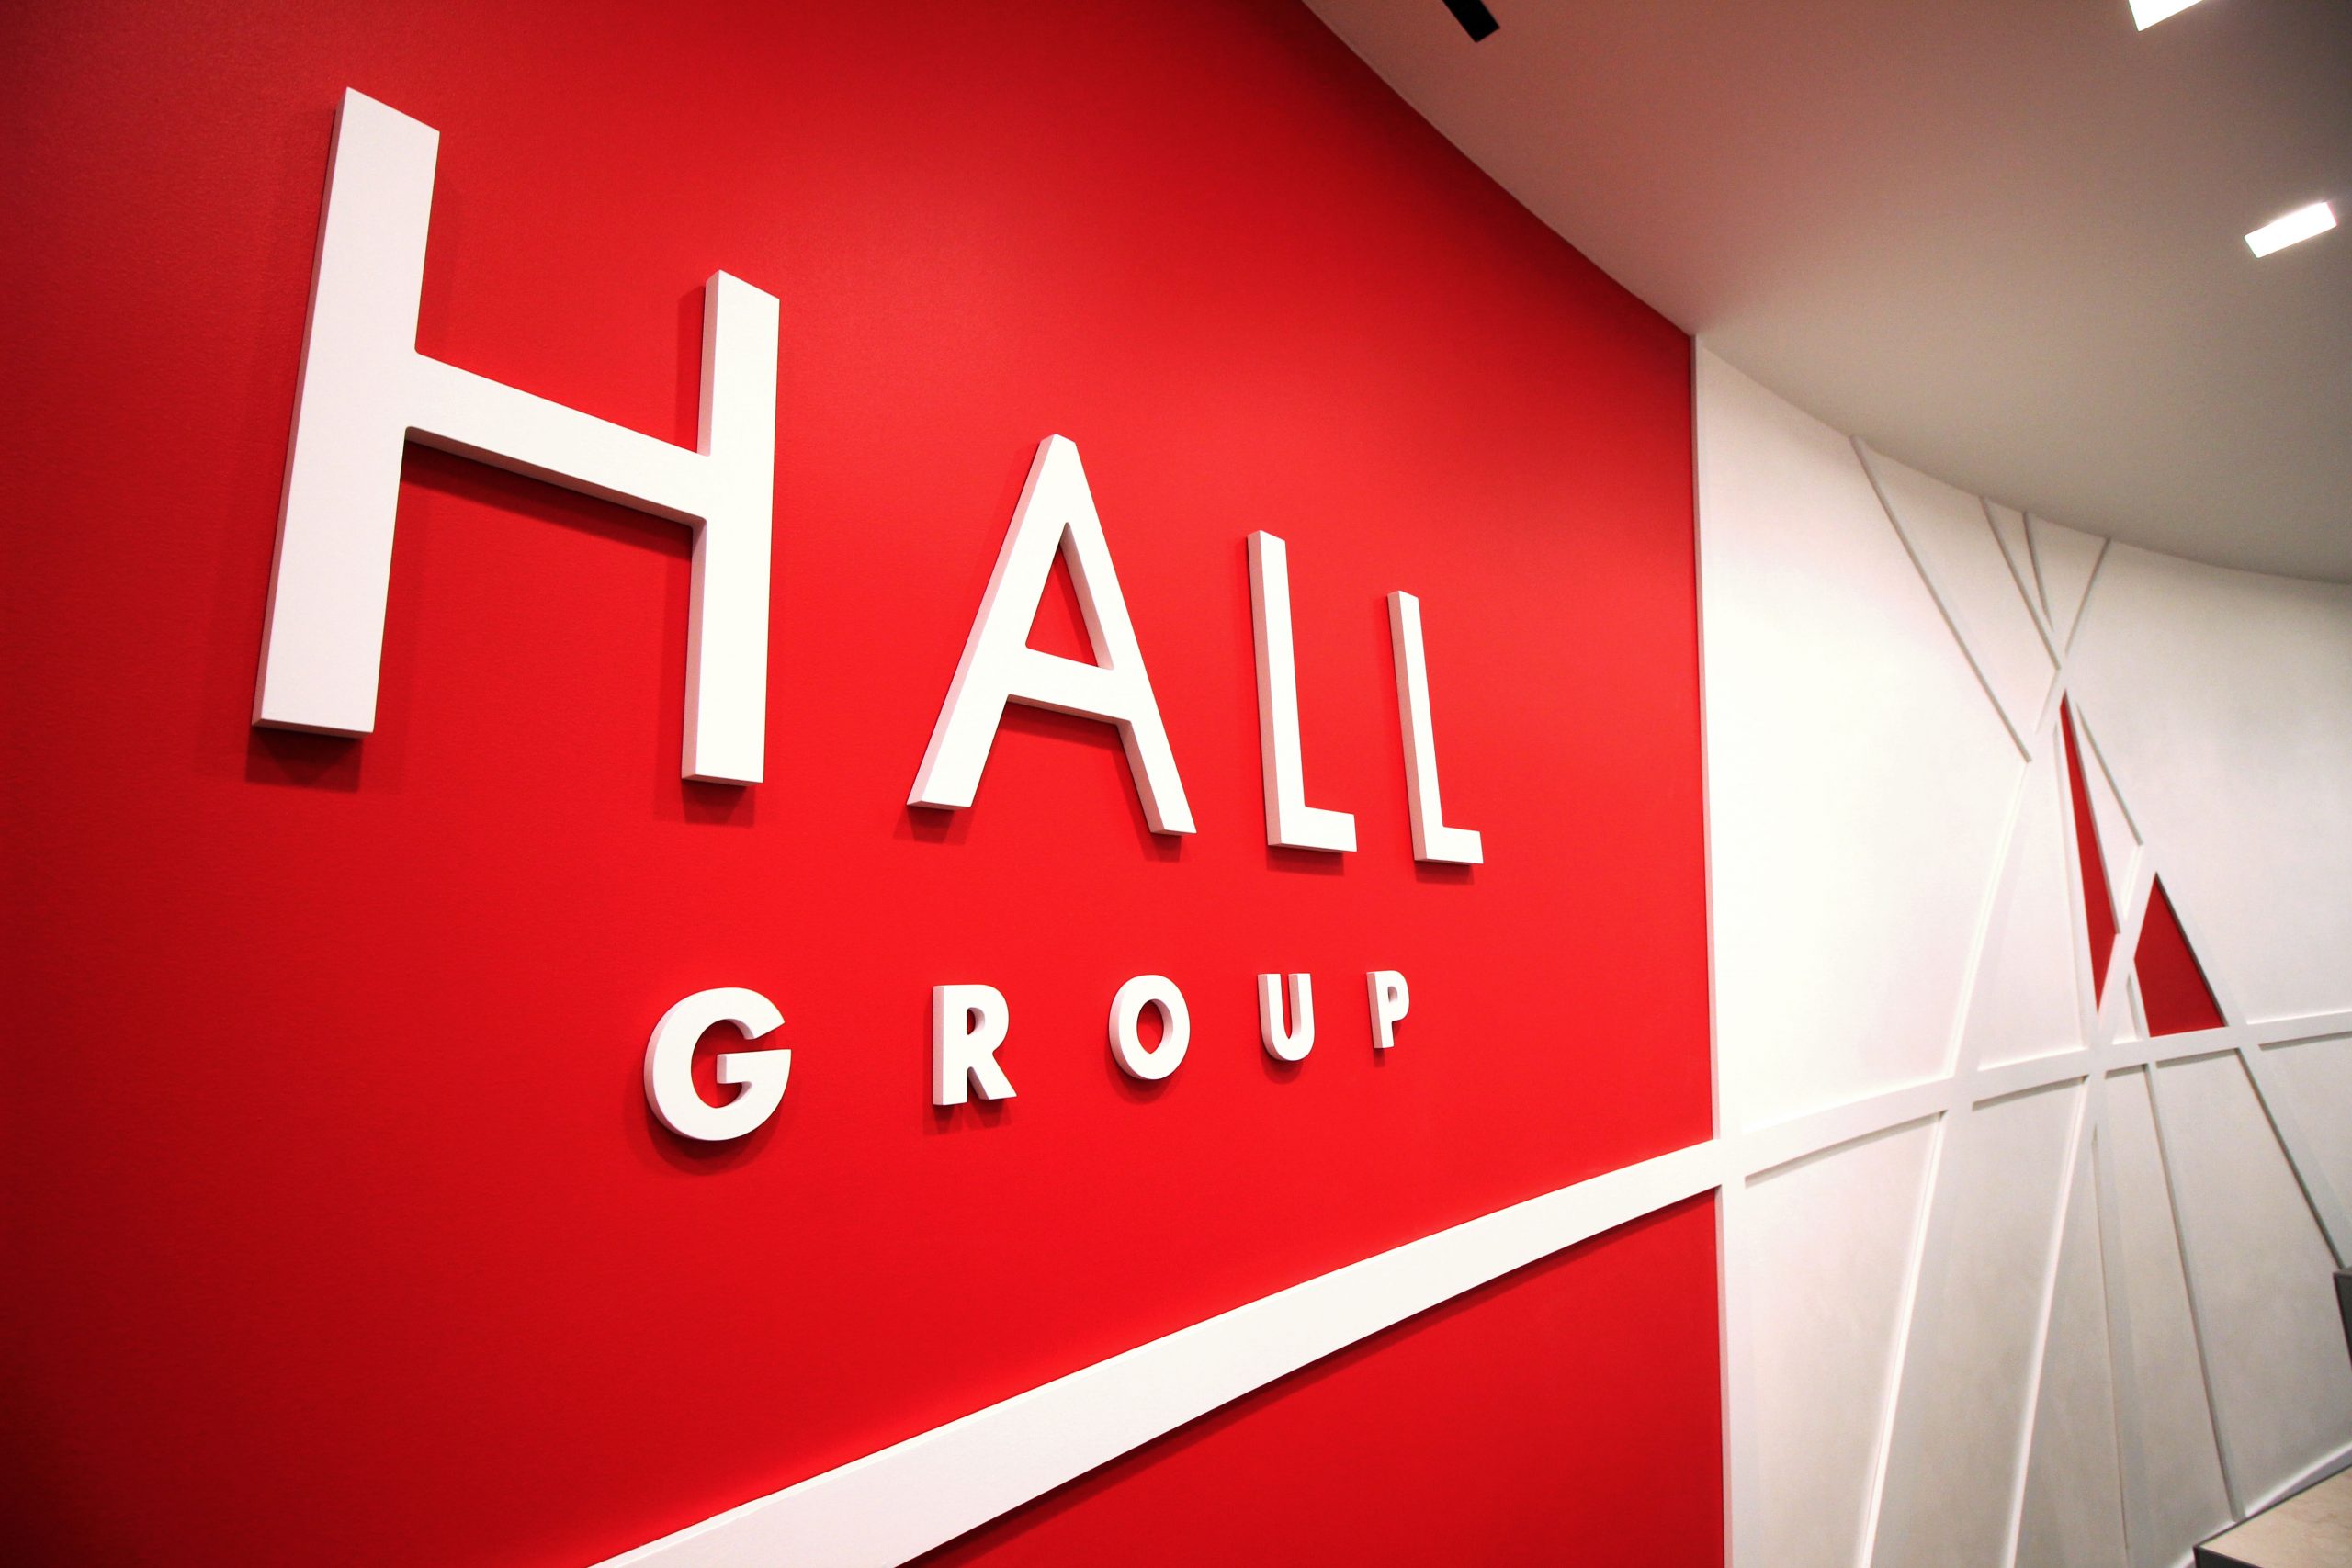 The Hall Group Experience